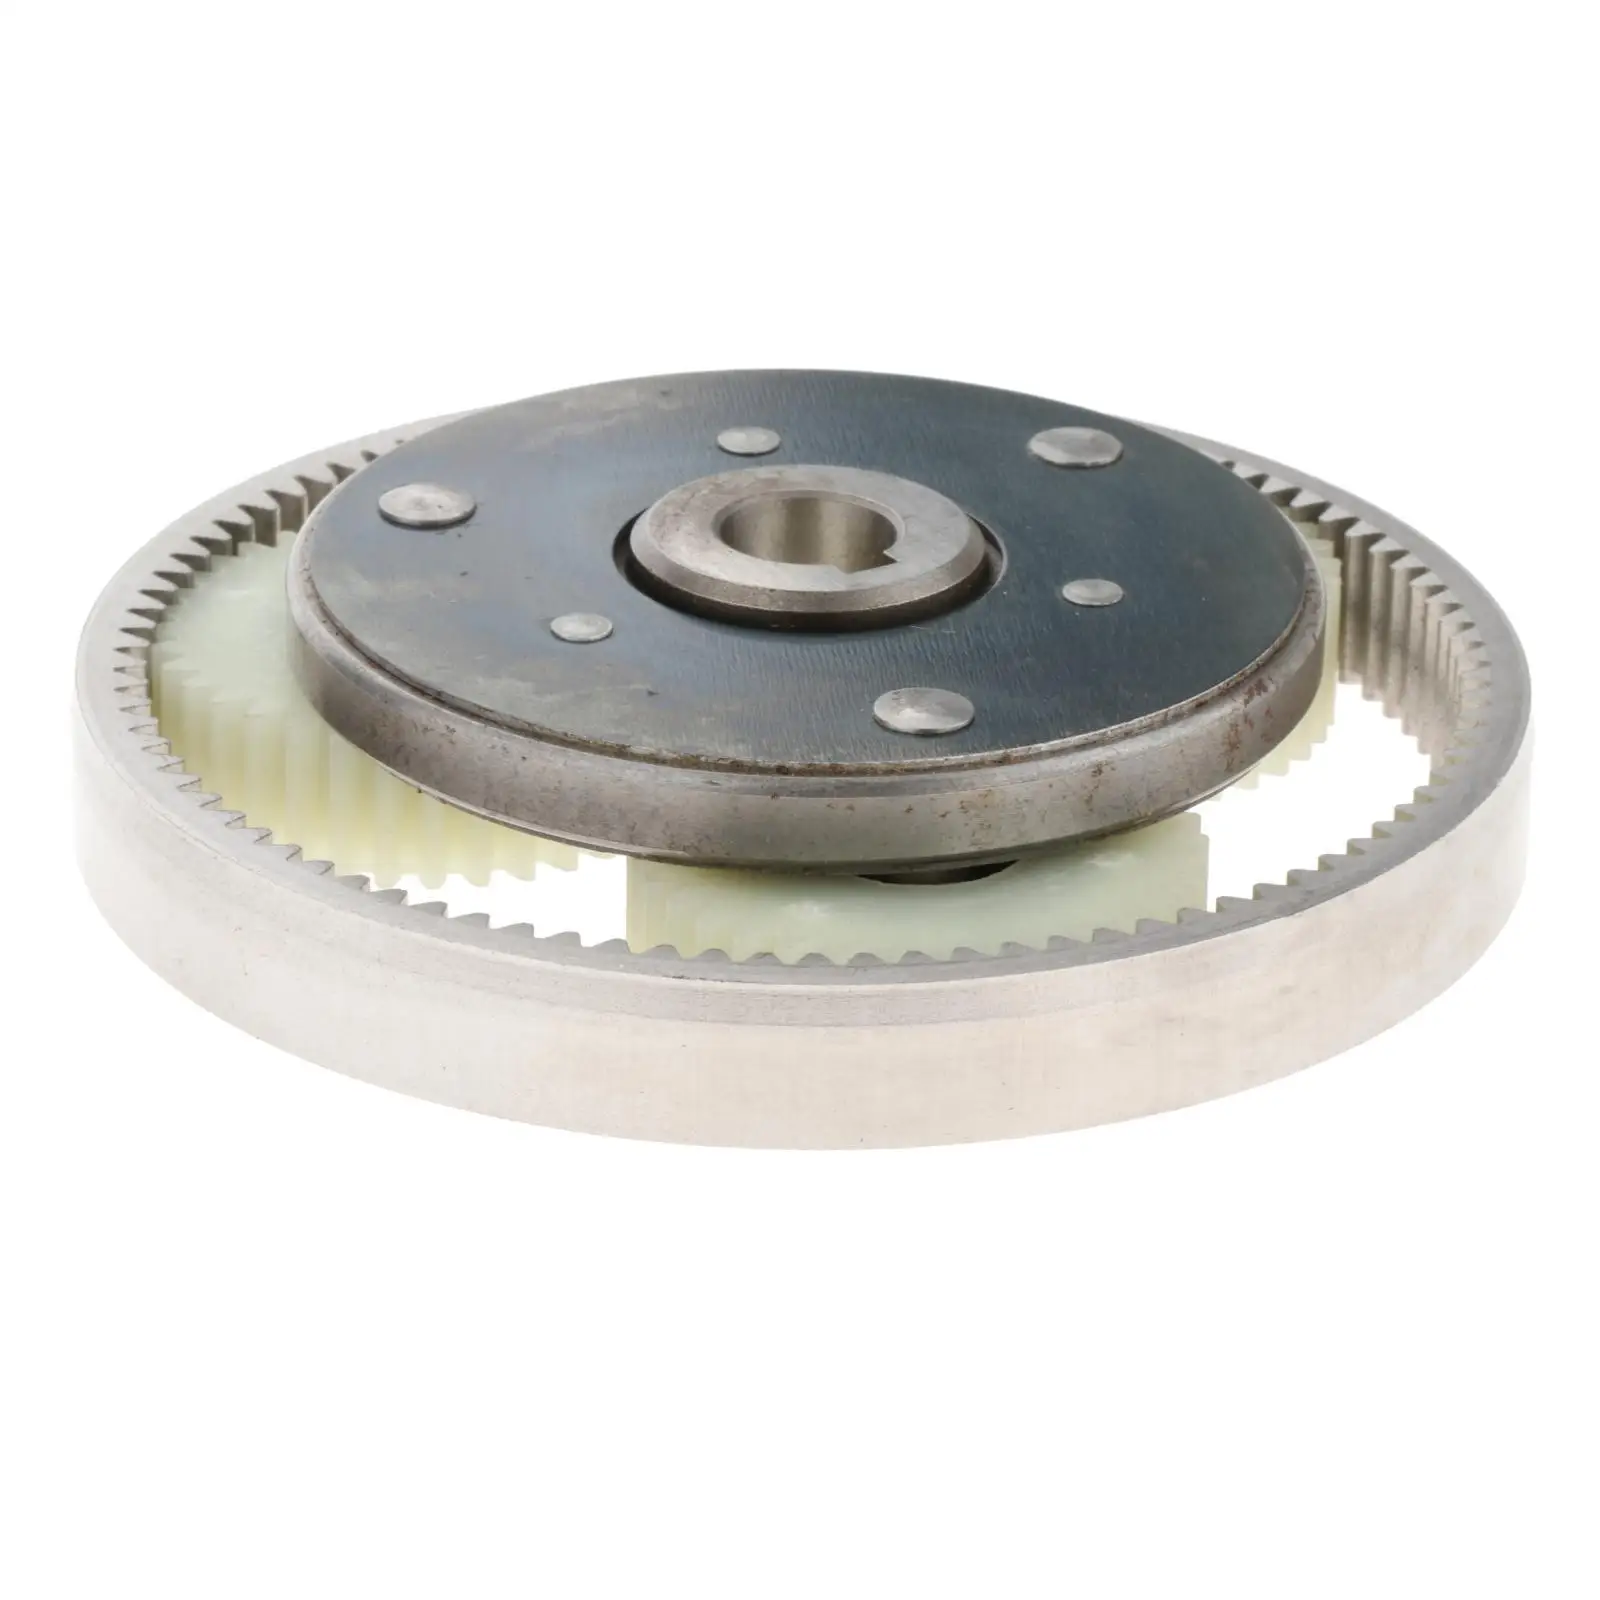 1 Set 36T Diameter:47.5 Mm Thickness:12Mm High  Electric Vehicle Motor  Ring  Clutch